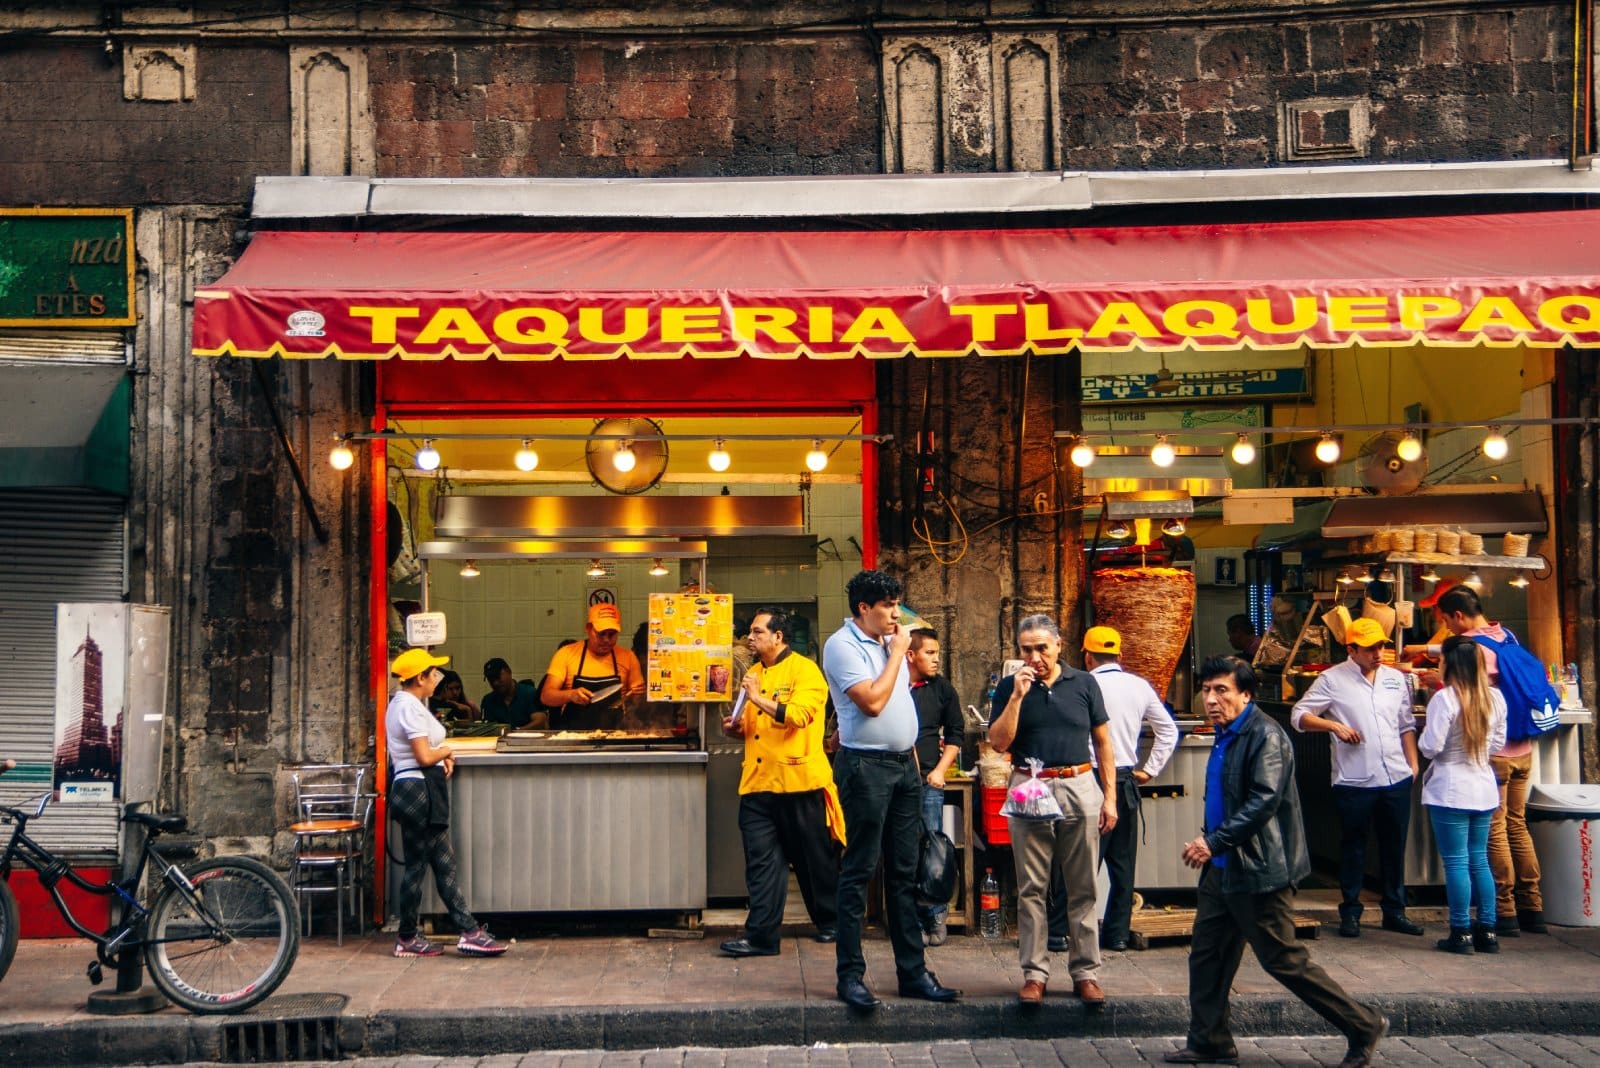 Image Credit: Shutterstock / Brester Irina <p>Explore the vibrant food markets of Mexico City, tasting local specialties like Tacos, Tamales, and Churros.</p>